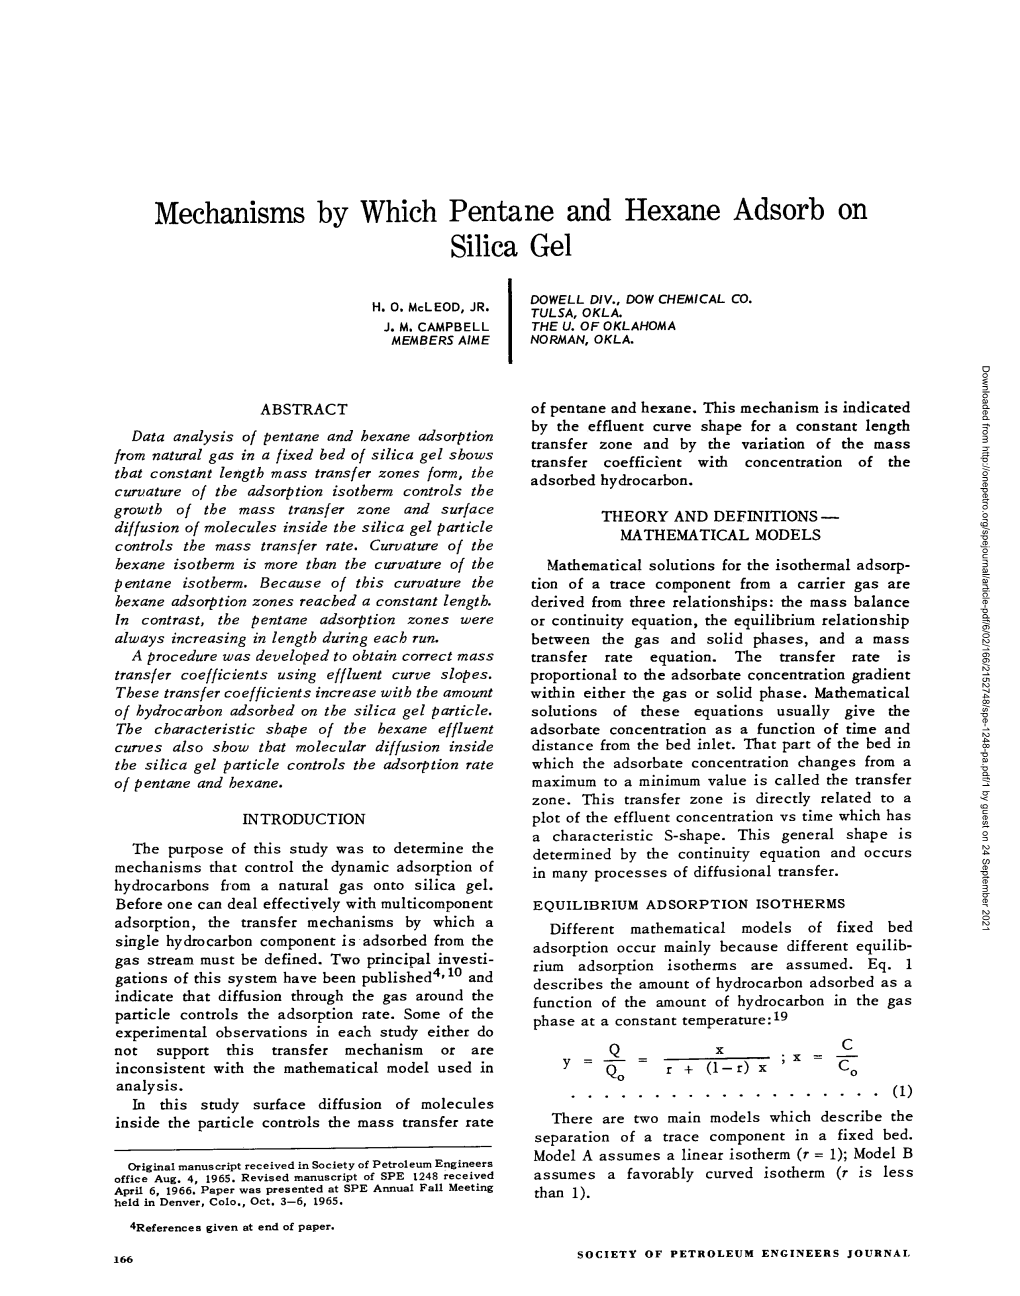 Mechanisms by Which Pentane and Hexane Adsorb on Silica Gel